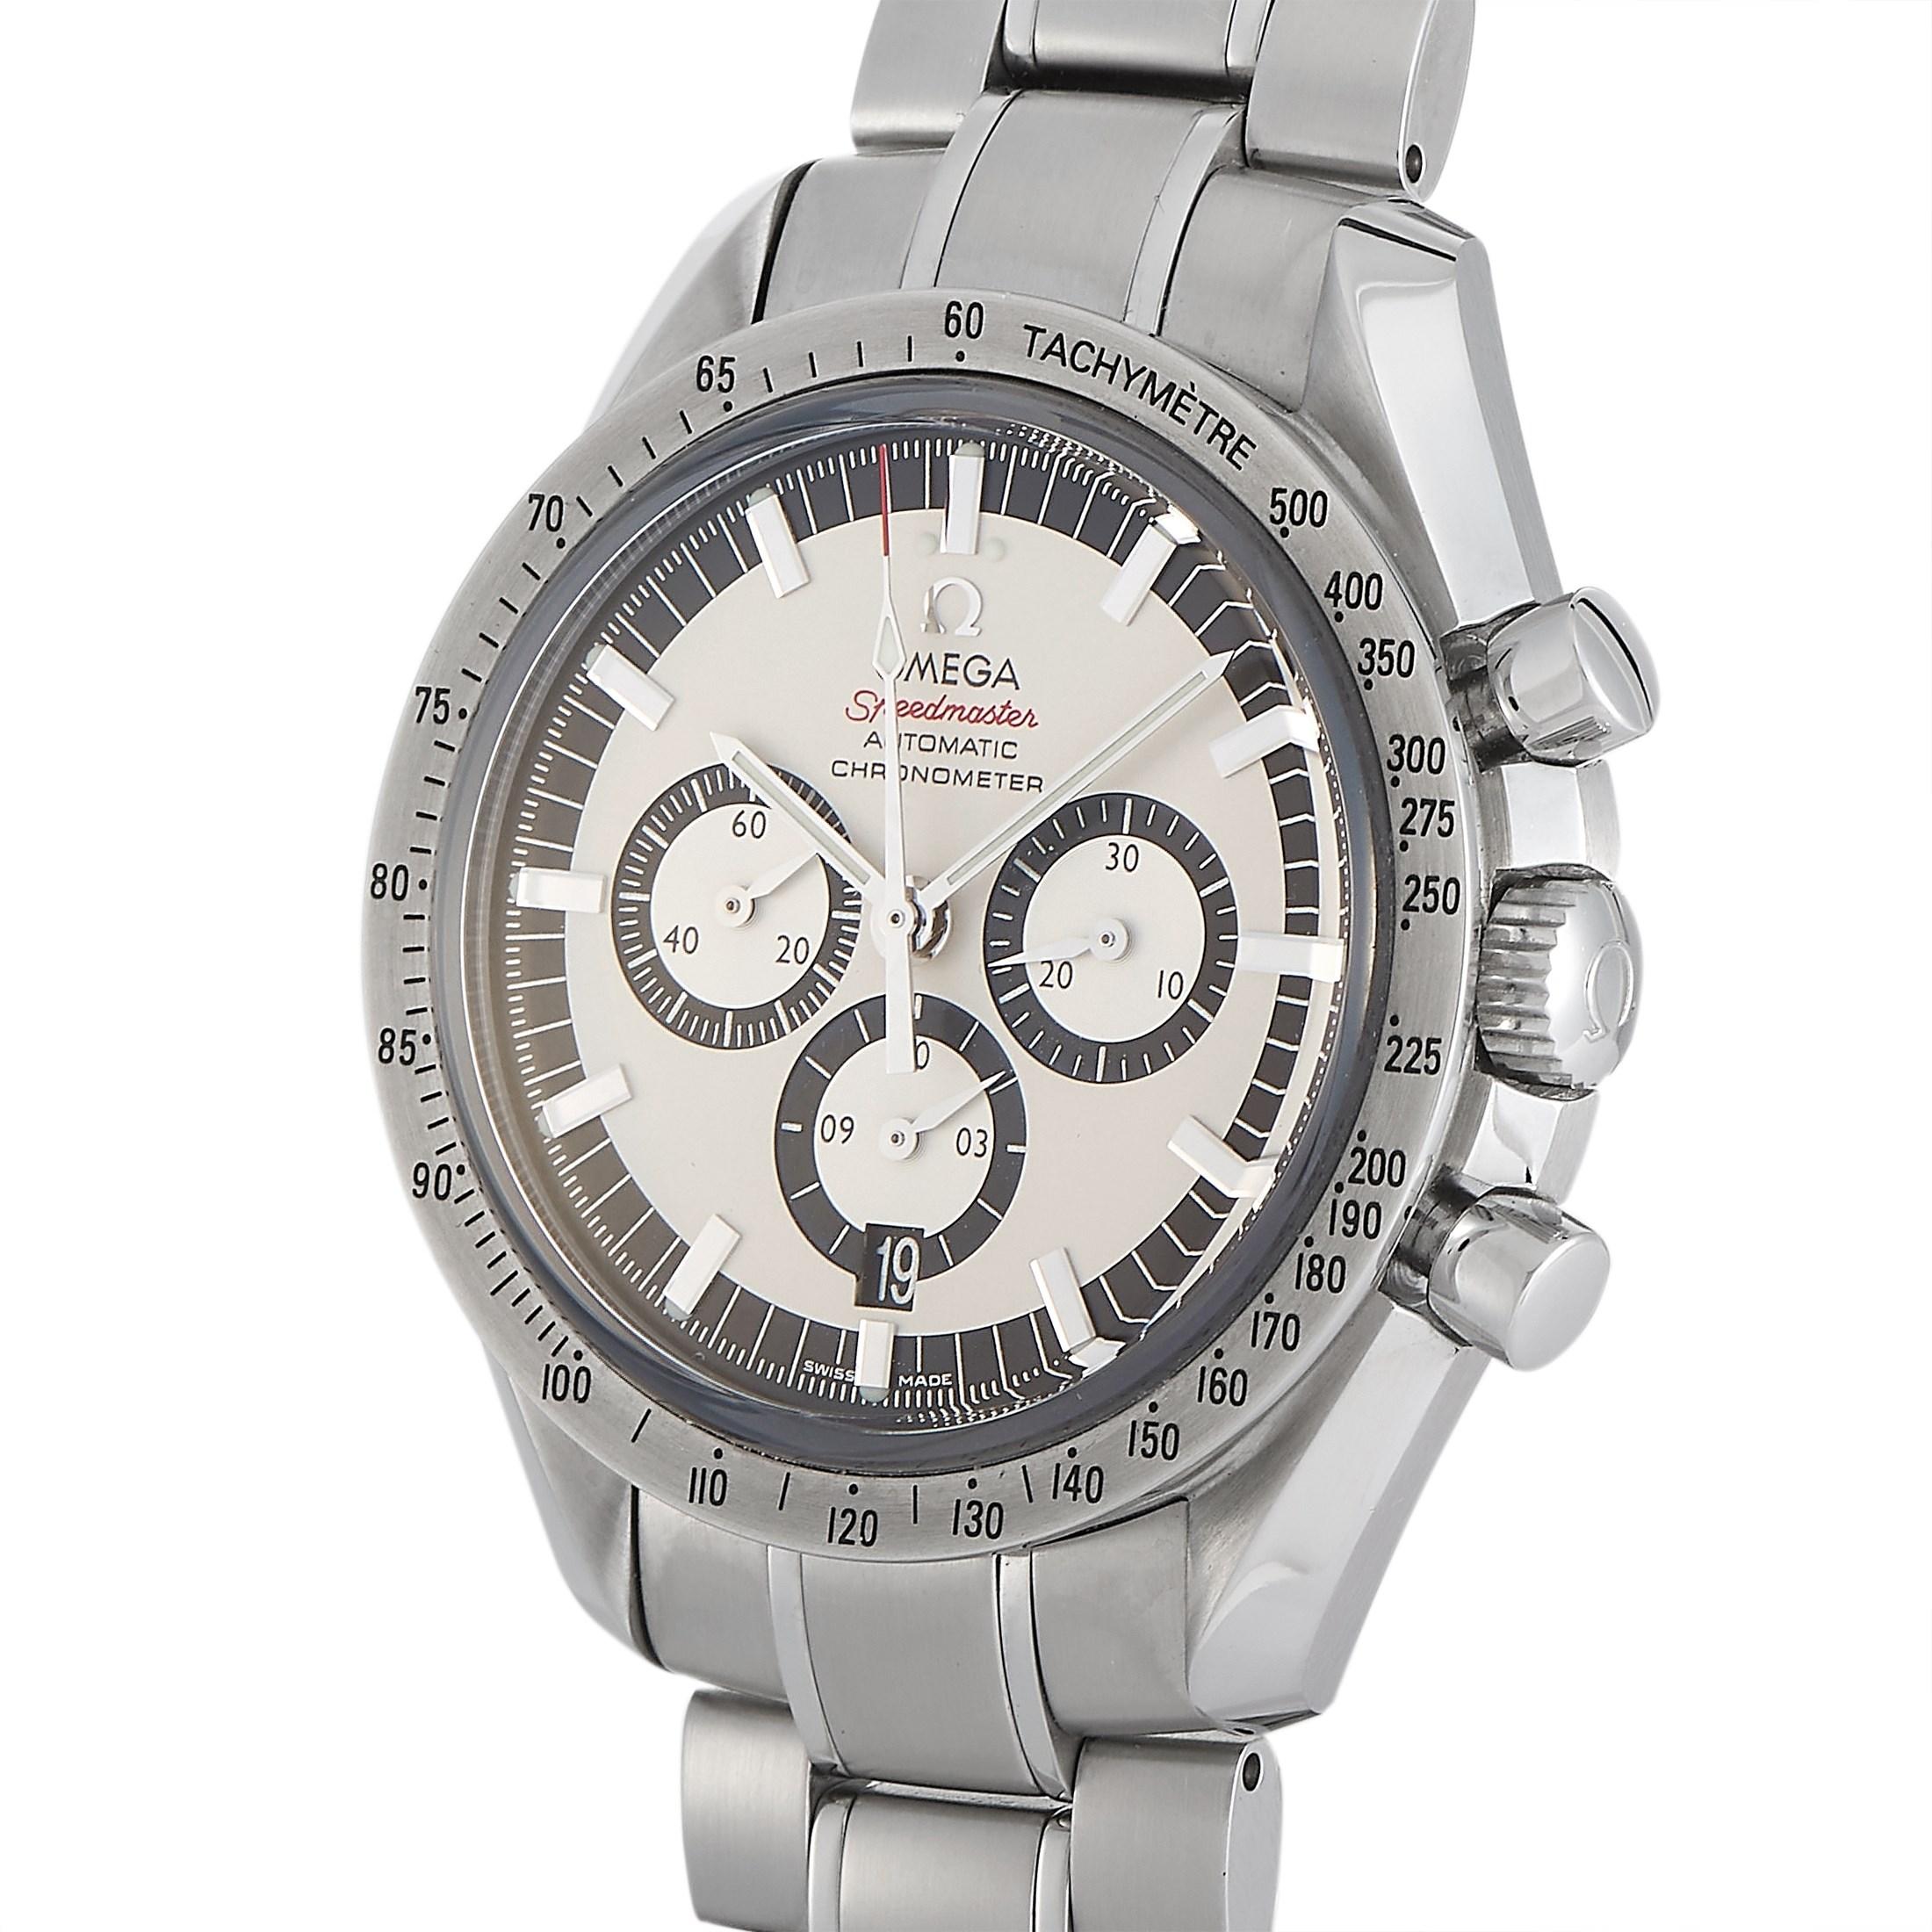 Released in 2004 to commemorate Mr. Schumacher's sixth world championship, here is one of the 6,000 limited edition Speedmaster 3506.31.00 units ever released. Famous for its 